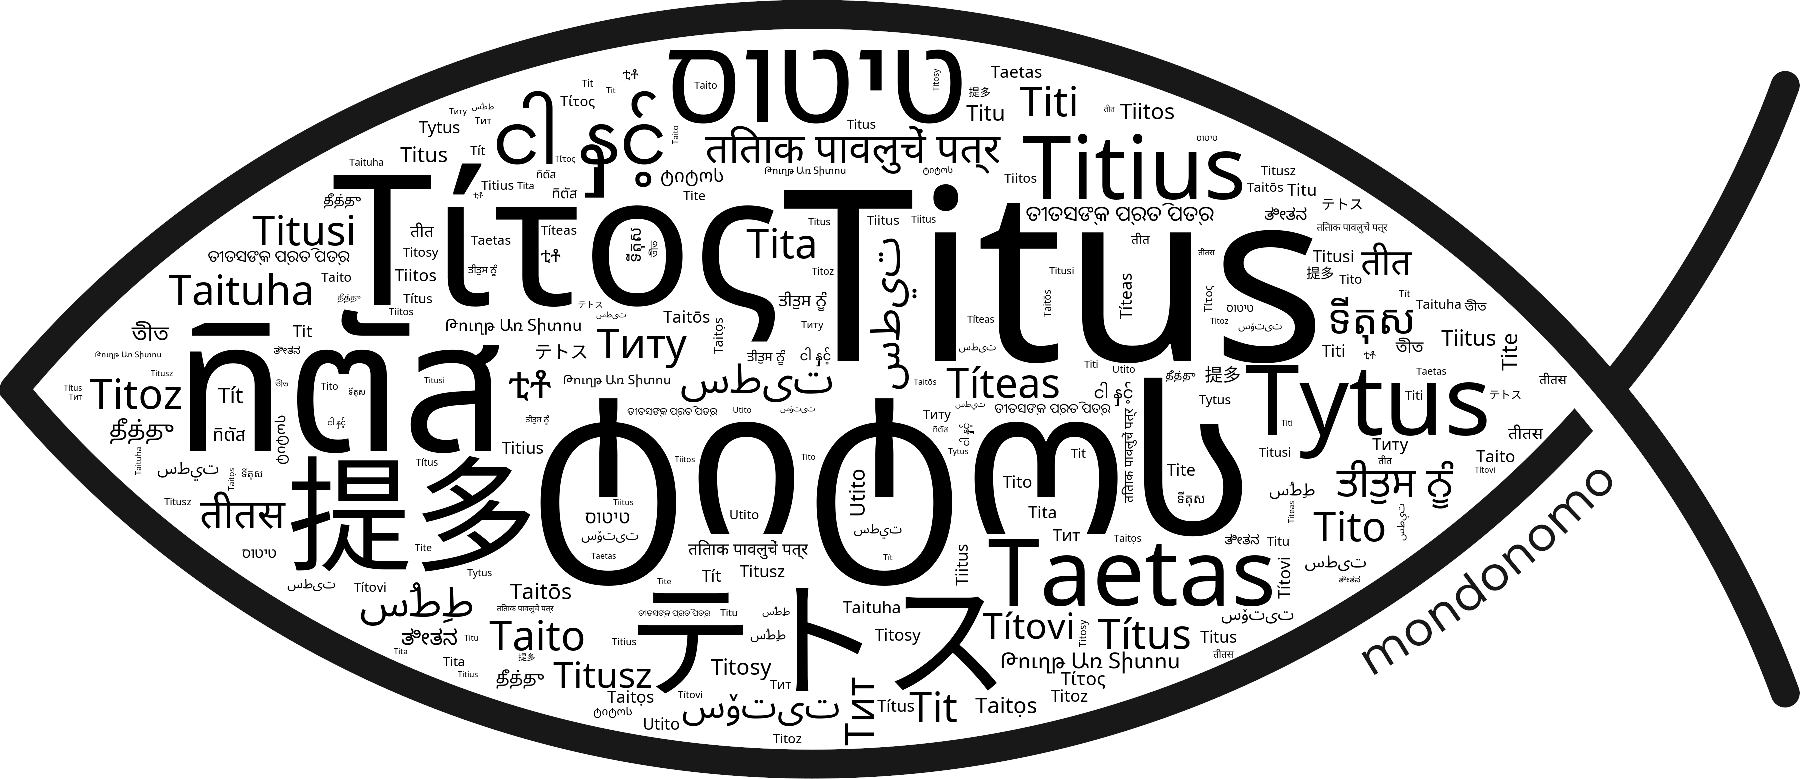 Name Titus in the world's Bibles